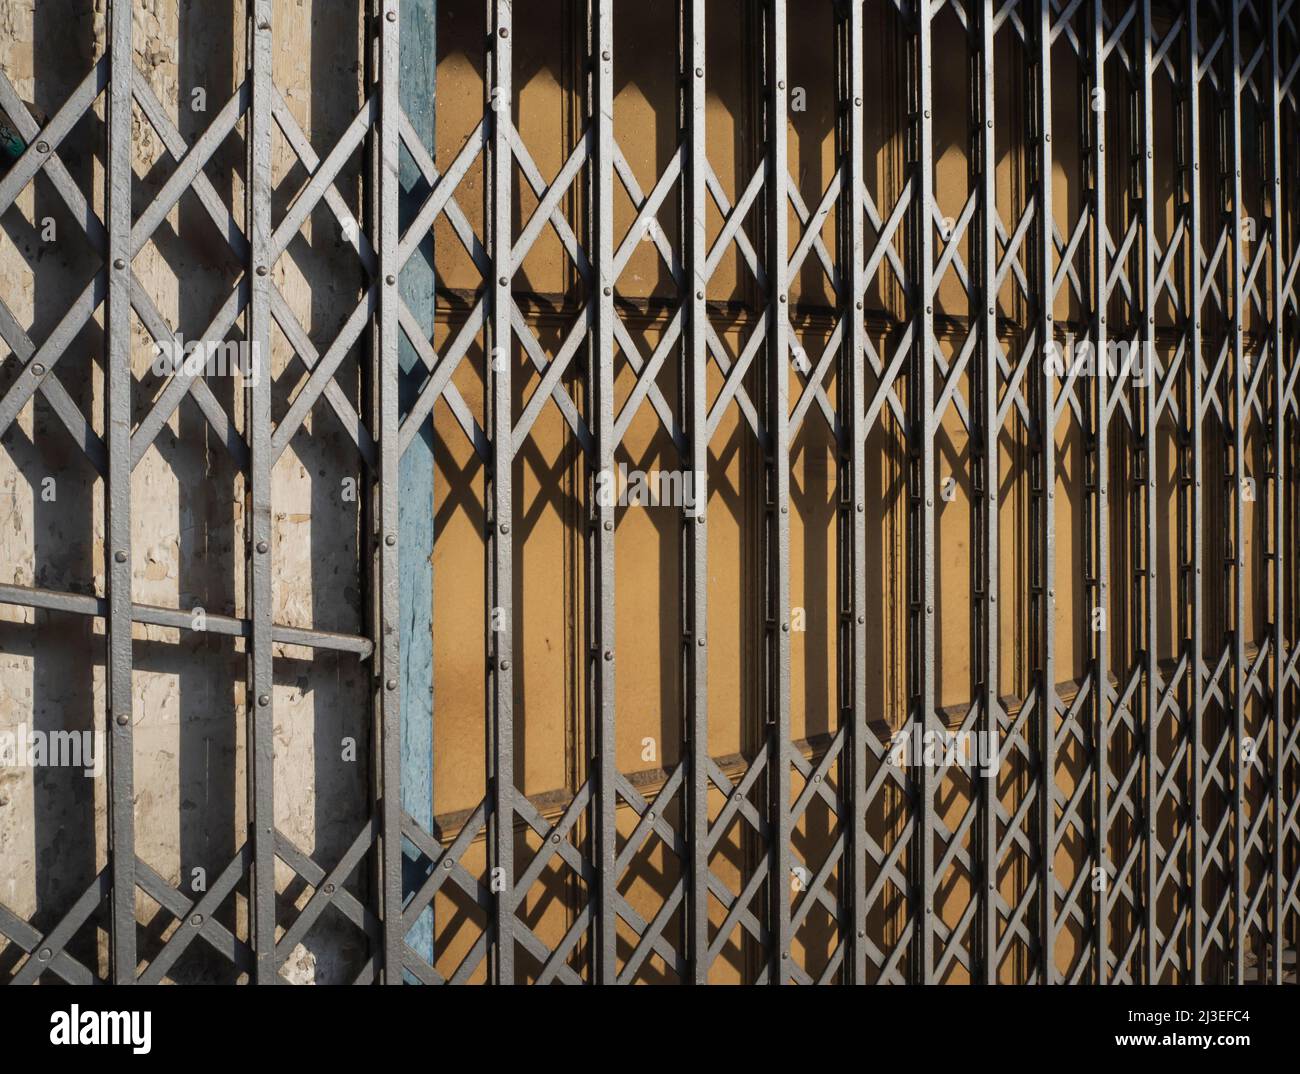 An old, rusty metal grill gate in front of wooden doors Stock Photo